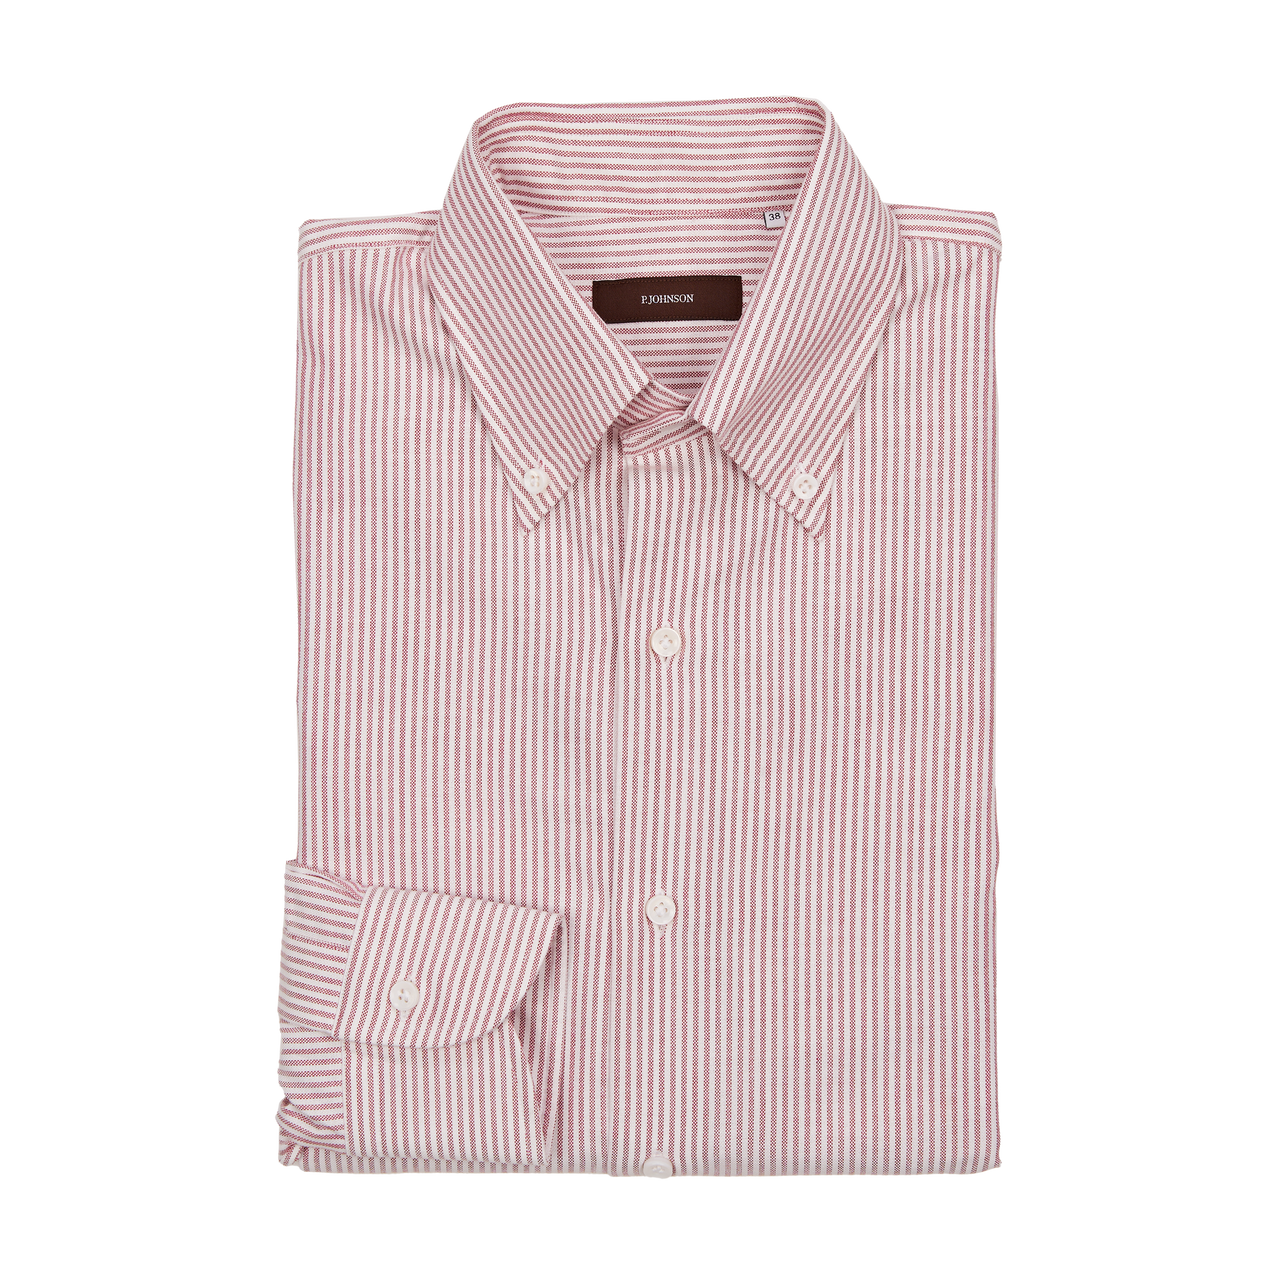 P. Johnson Shirt in Red Stripe Organic Cotton Oxford with Button Down Collar